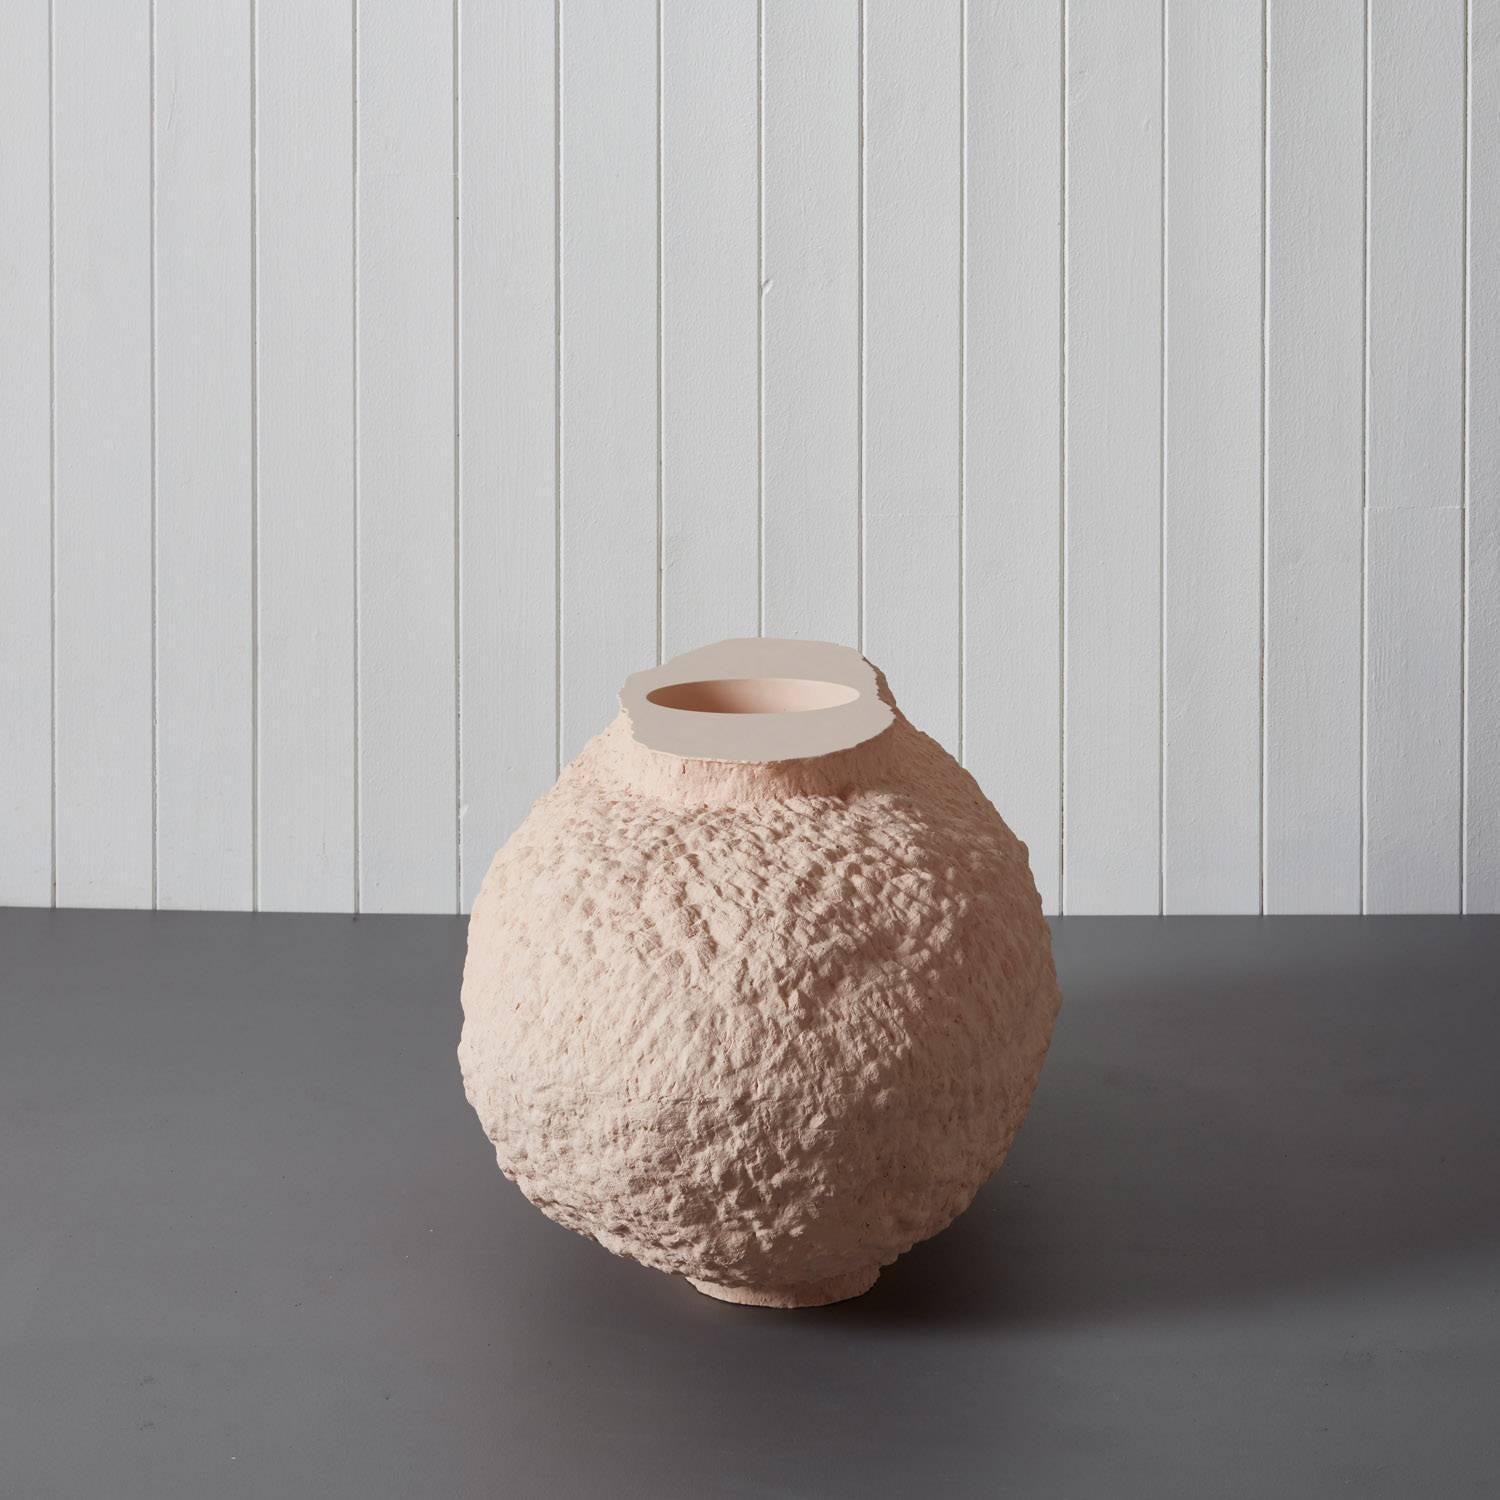 “Acacia Vessel” by Malgorzata Bany, a large light pink jesmonite vessel with a smoothened top and richly textured body. The piece takes inspiration from daily cleansing rituals and the process of decay, in particular Japanese Tsukubai- ceremonial